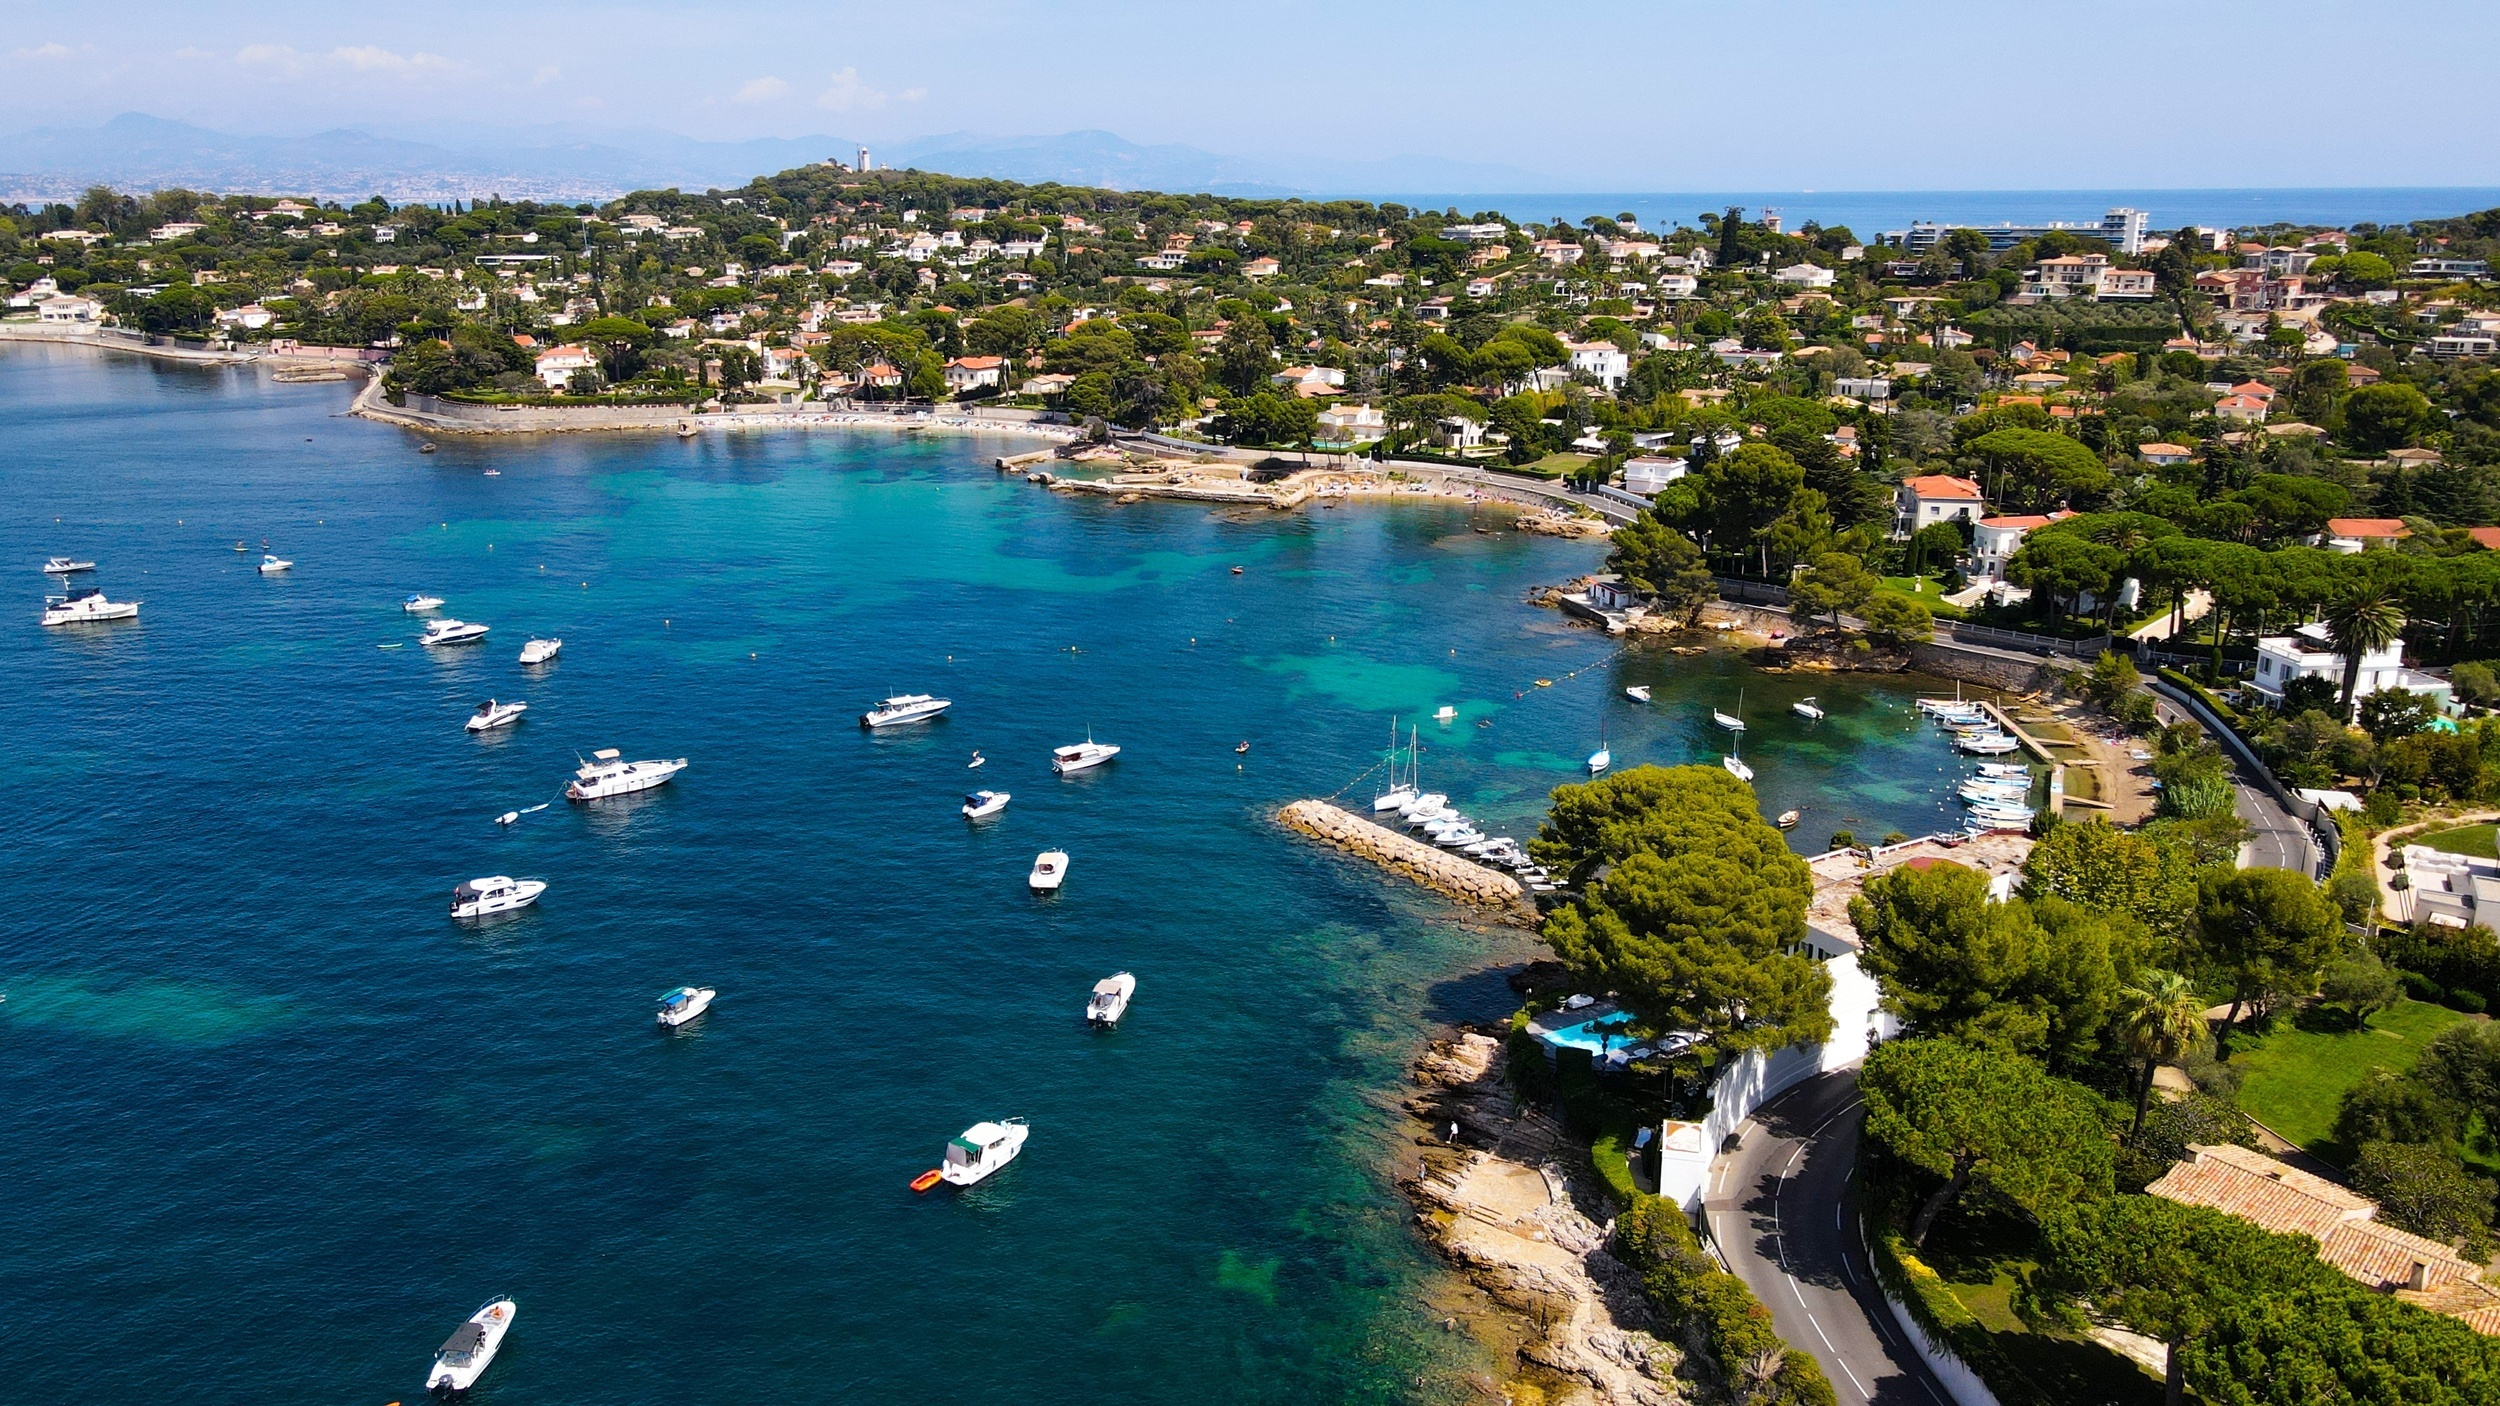 <p>Most visitors to the Cote d’Azur head for the larger cities, such as Nice or Cannes. However, Antibes, located between both, is the perfect place to truly relax. The Old Town is magnificent, with ramparts that provide epic views of the sea and the nearby peninsula with centuries-old mansions.</p><p>You may also like: <a href='https://www.yardbarker.com/lifestyle/articles/the_14_most_beautiful_beach_towns_on_the_west_coast_113023/s1__38578337'>The 14 most beautiful beach towns on the West Coast</a></p>